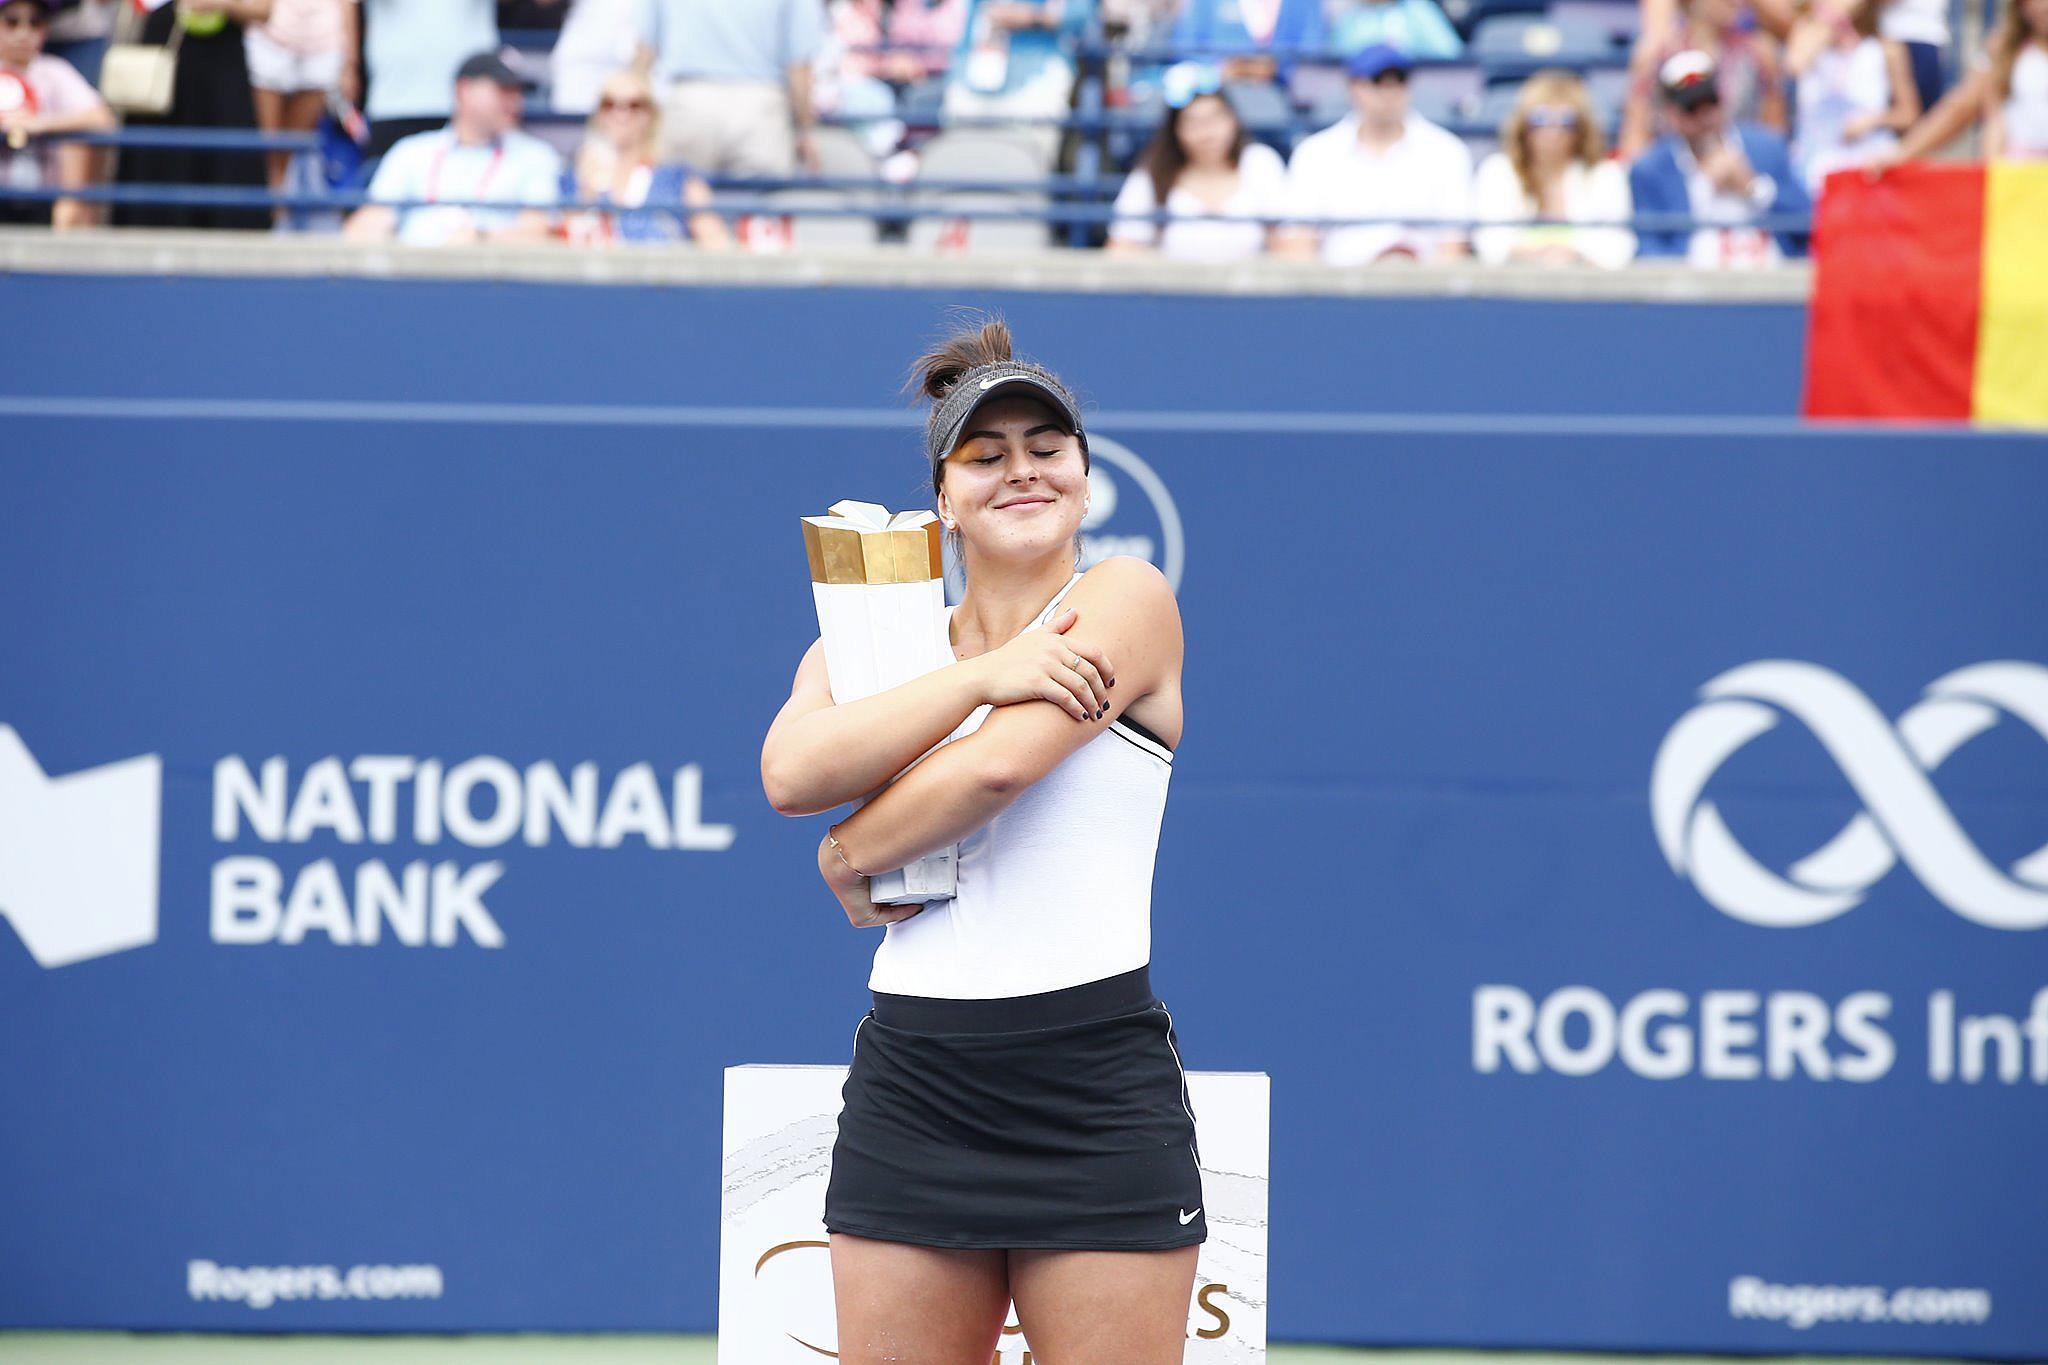 Canadian teenager Bianca Andreescu wins Rogers Cup 2019_40.1